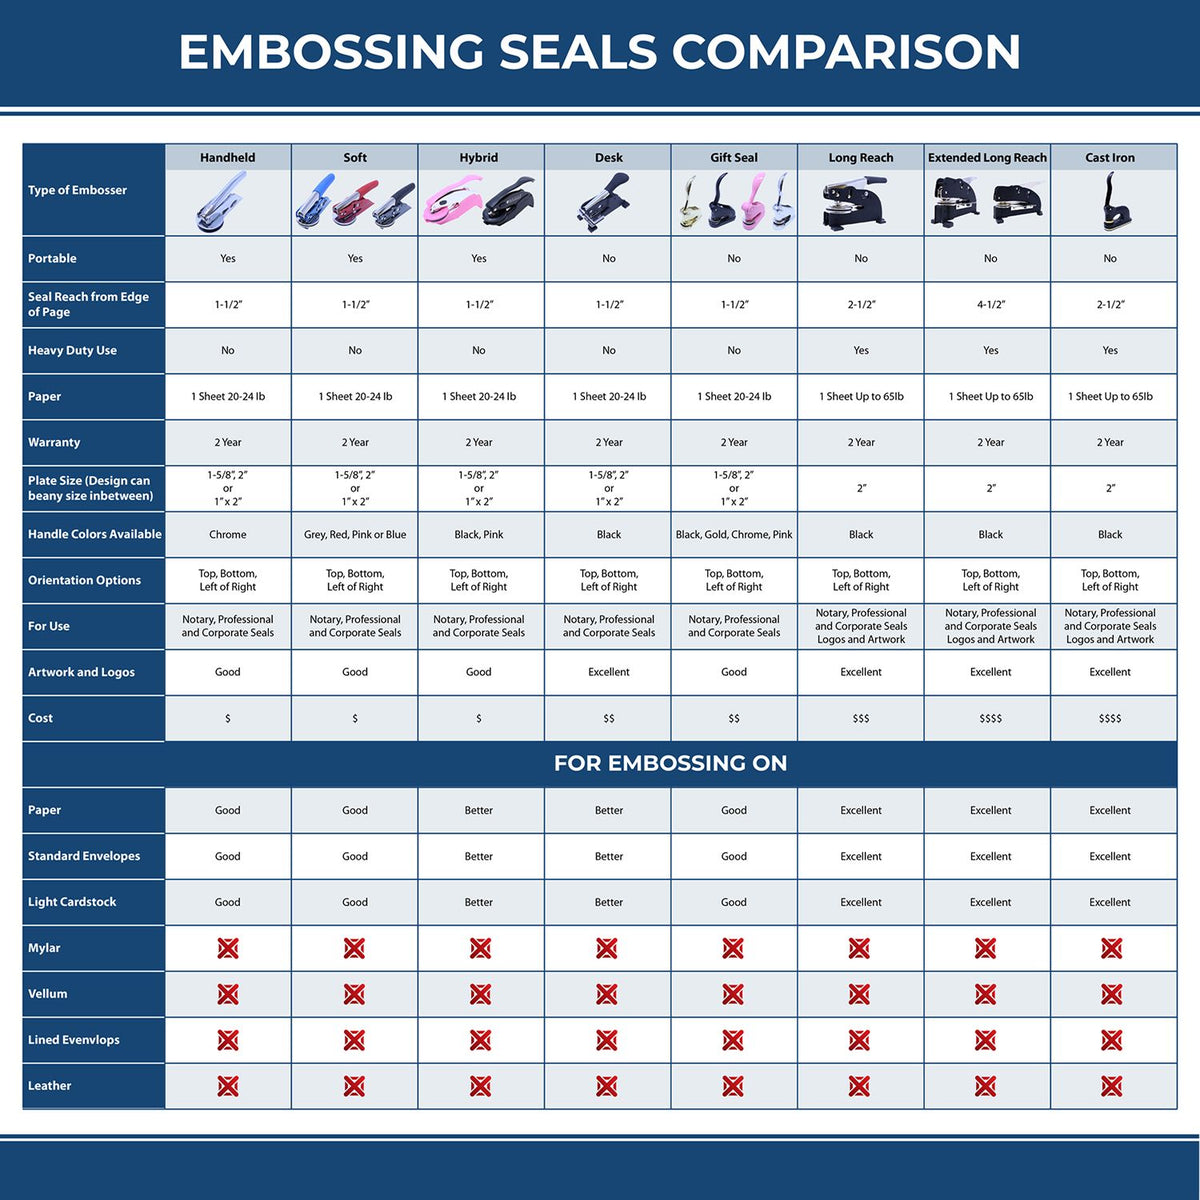 A comparison chart for the different types of mount models available for the Handheld New Jersey Professional Engineer Embosser.